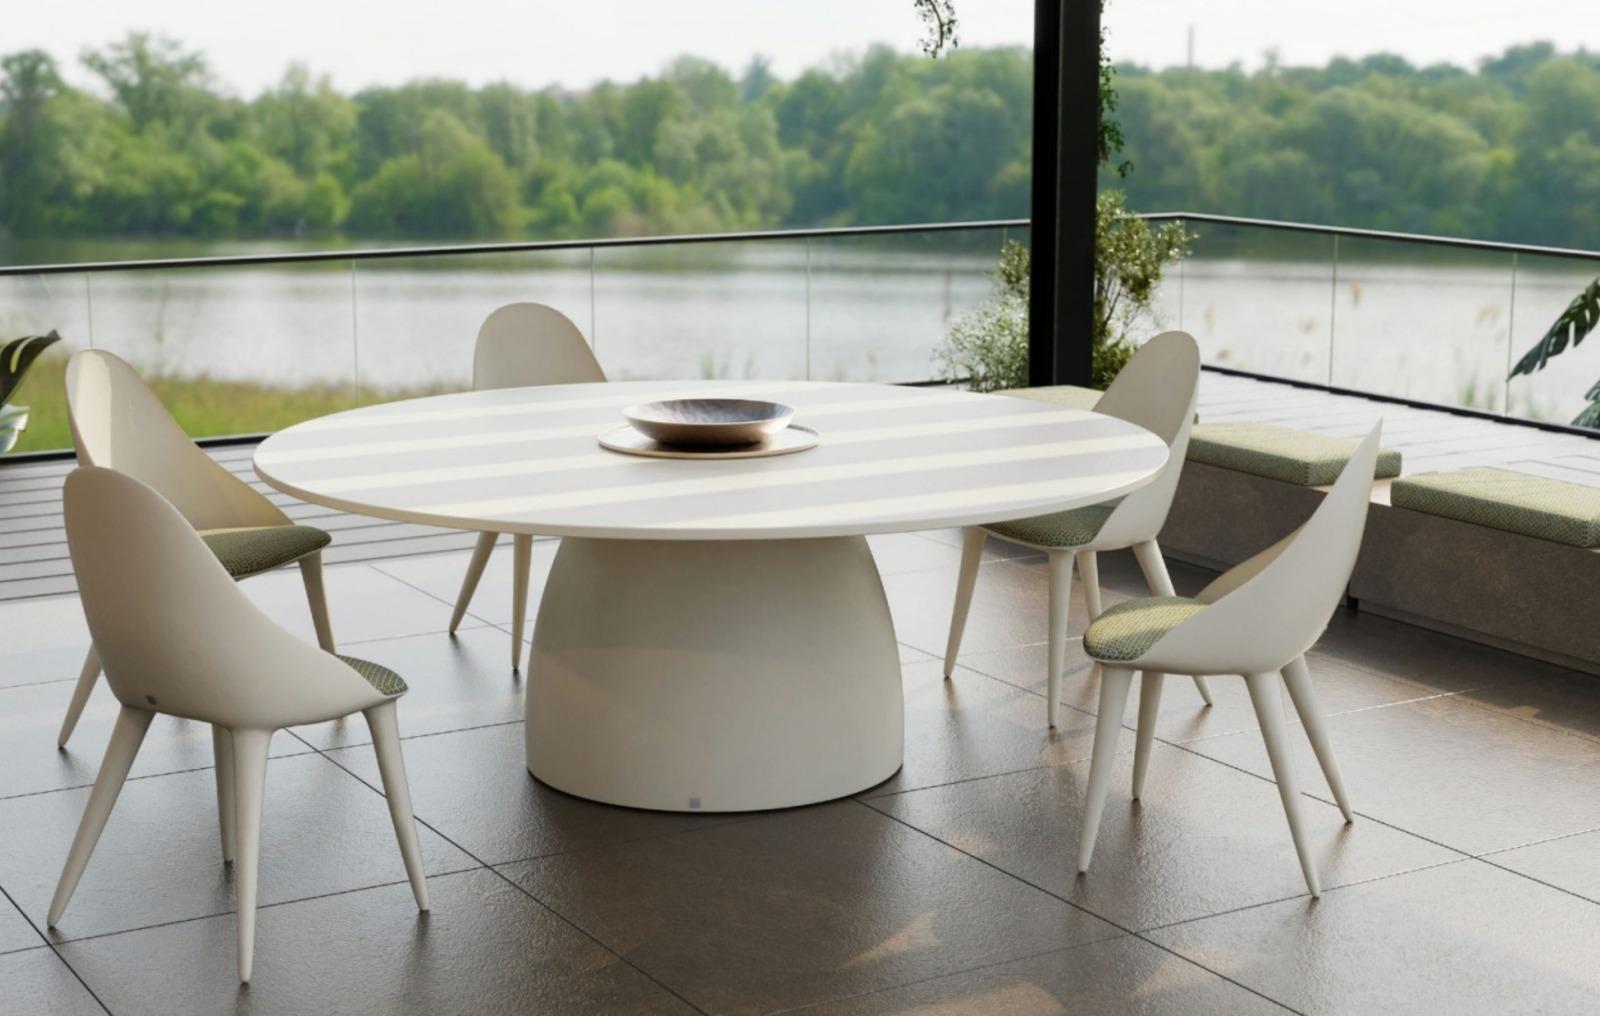 SUMMER 2024

Dining table

General information

Dimensions
Ø200 x 75 cm /
Ø78.7 x 29.5 in
Weight
148 kg / 326 lbs
Seats 10

Materials and colors

Structure: Resin reinforced with fiberglass, finished in white matte suitable for outdoor.